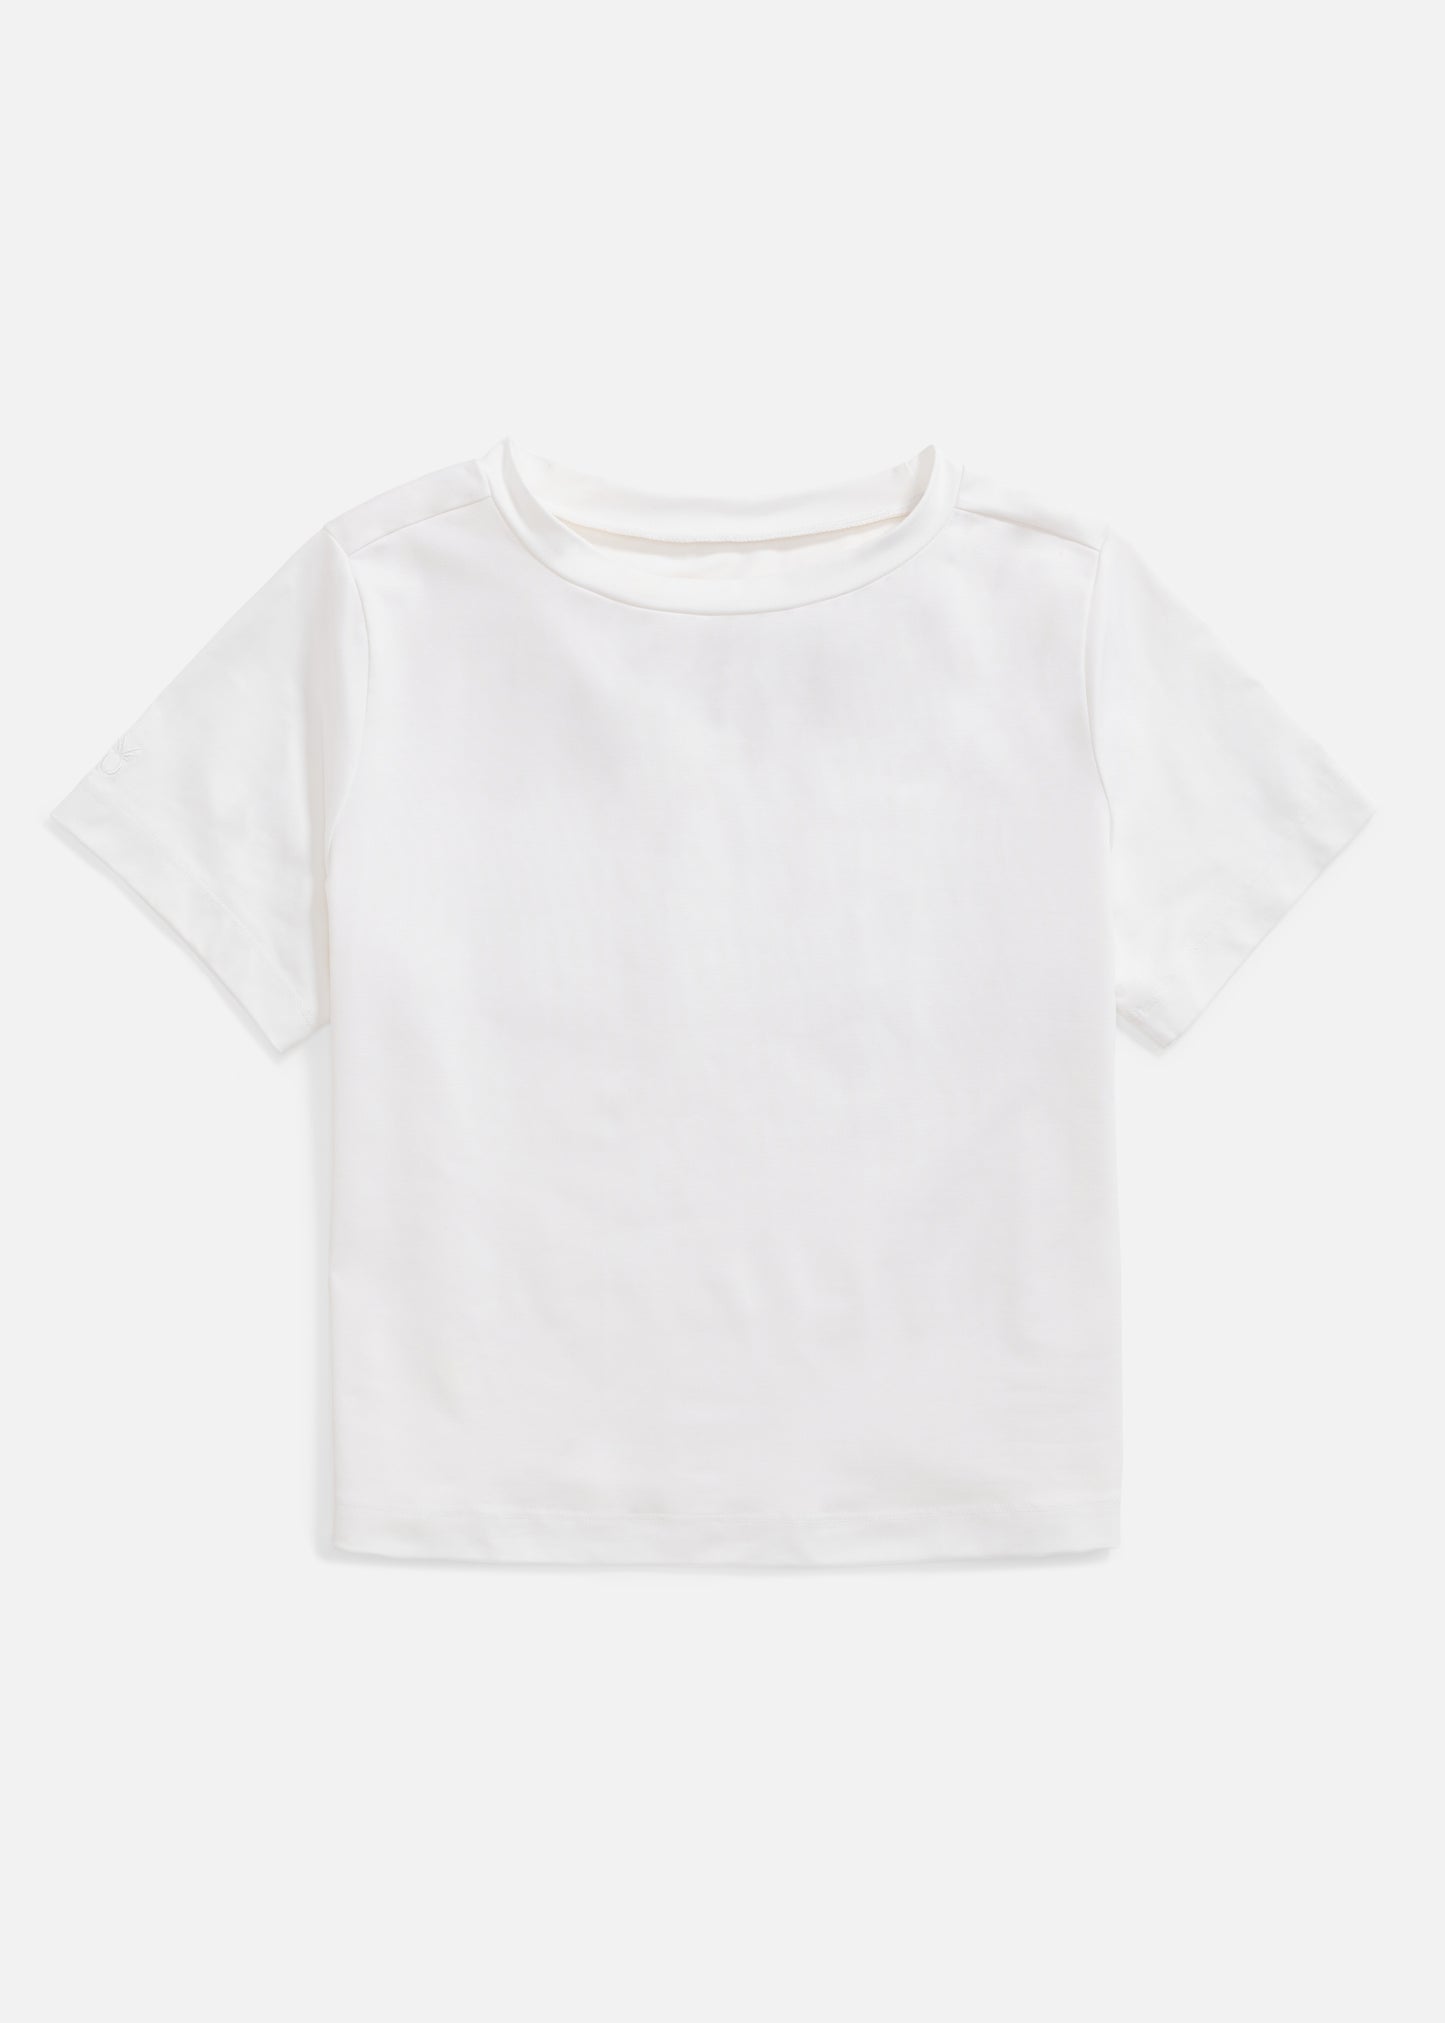 Surfside Crop Tee in Repreve Stretch (White)